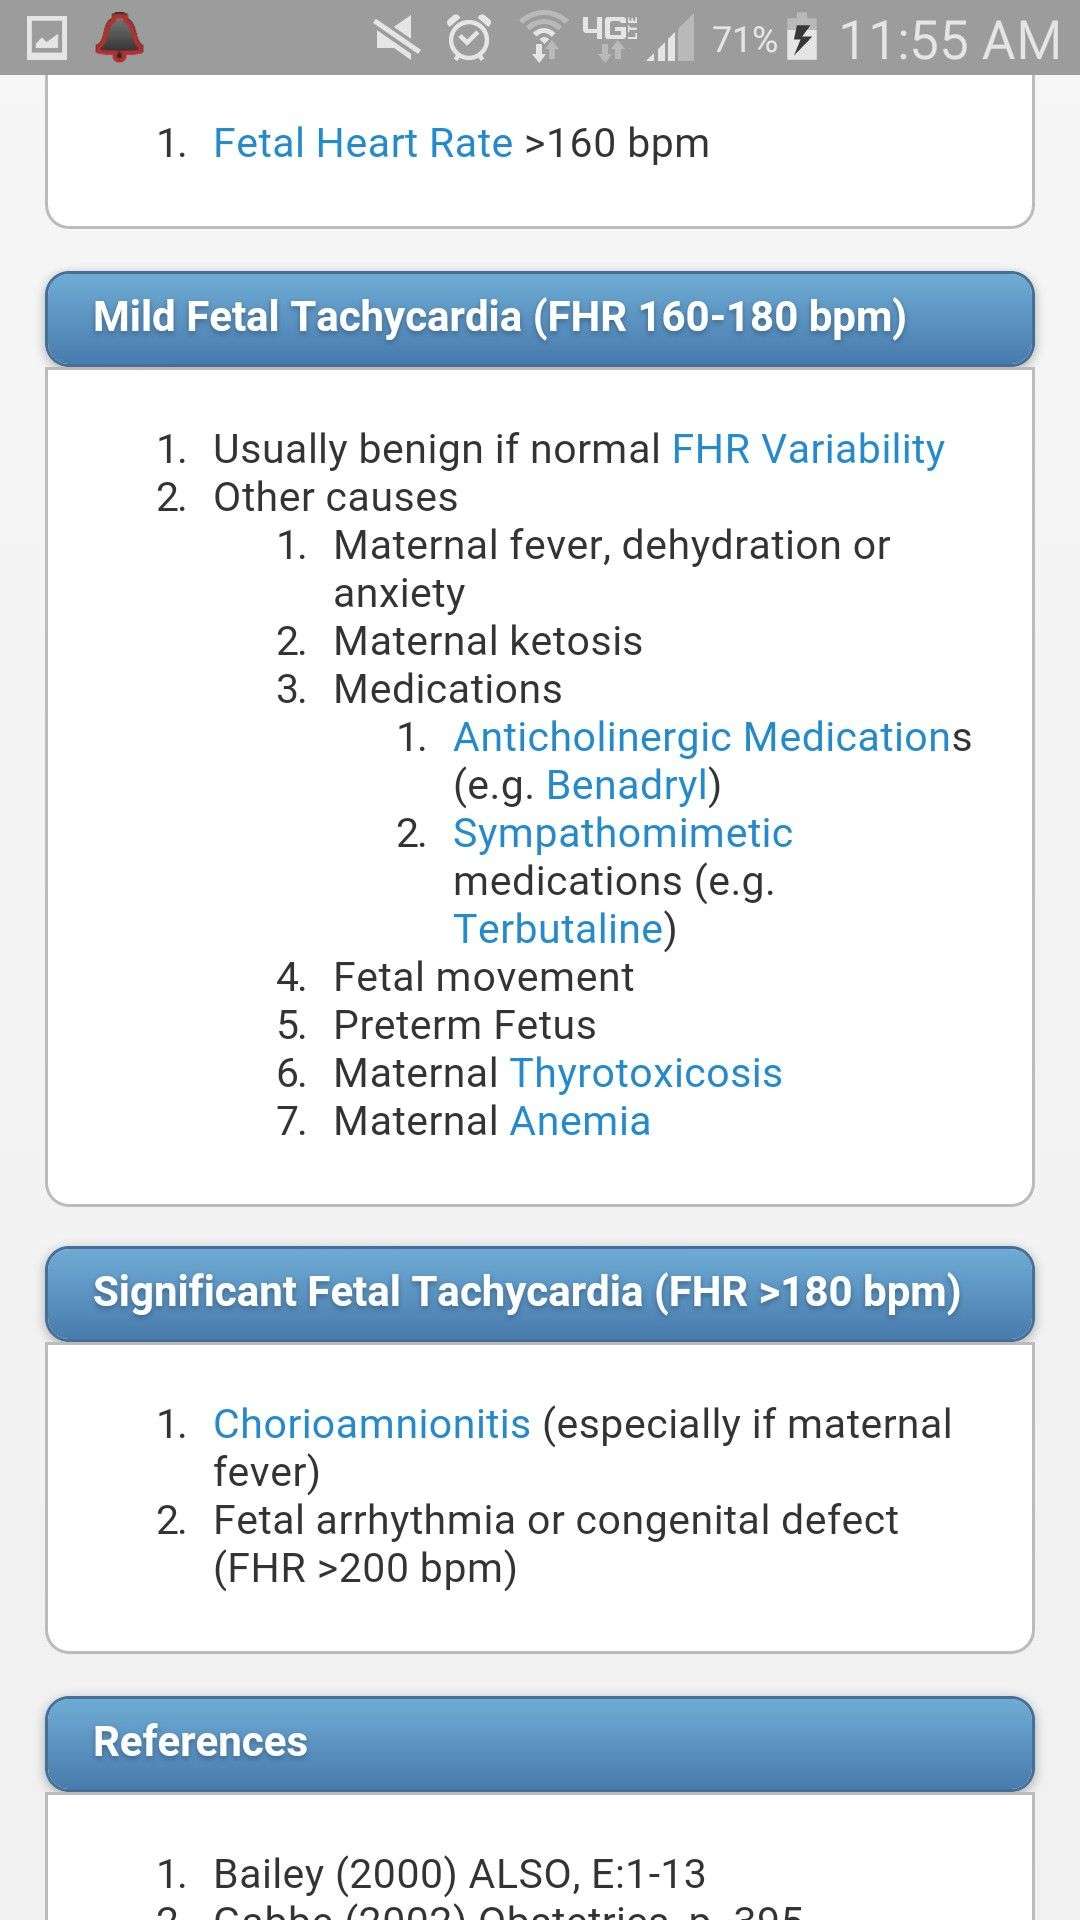 What Is Maternal Ketosis